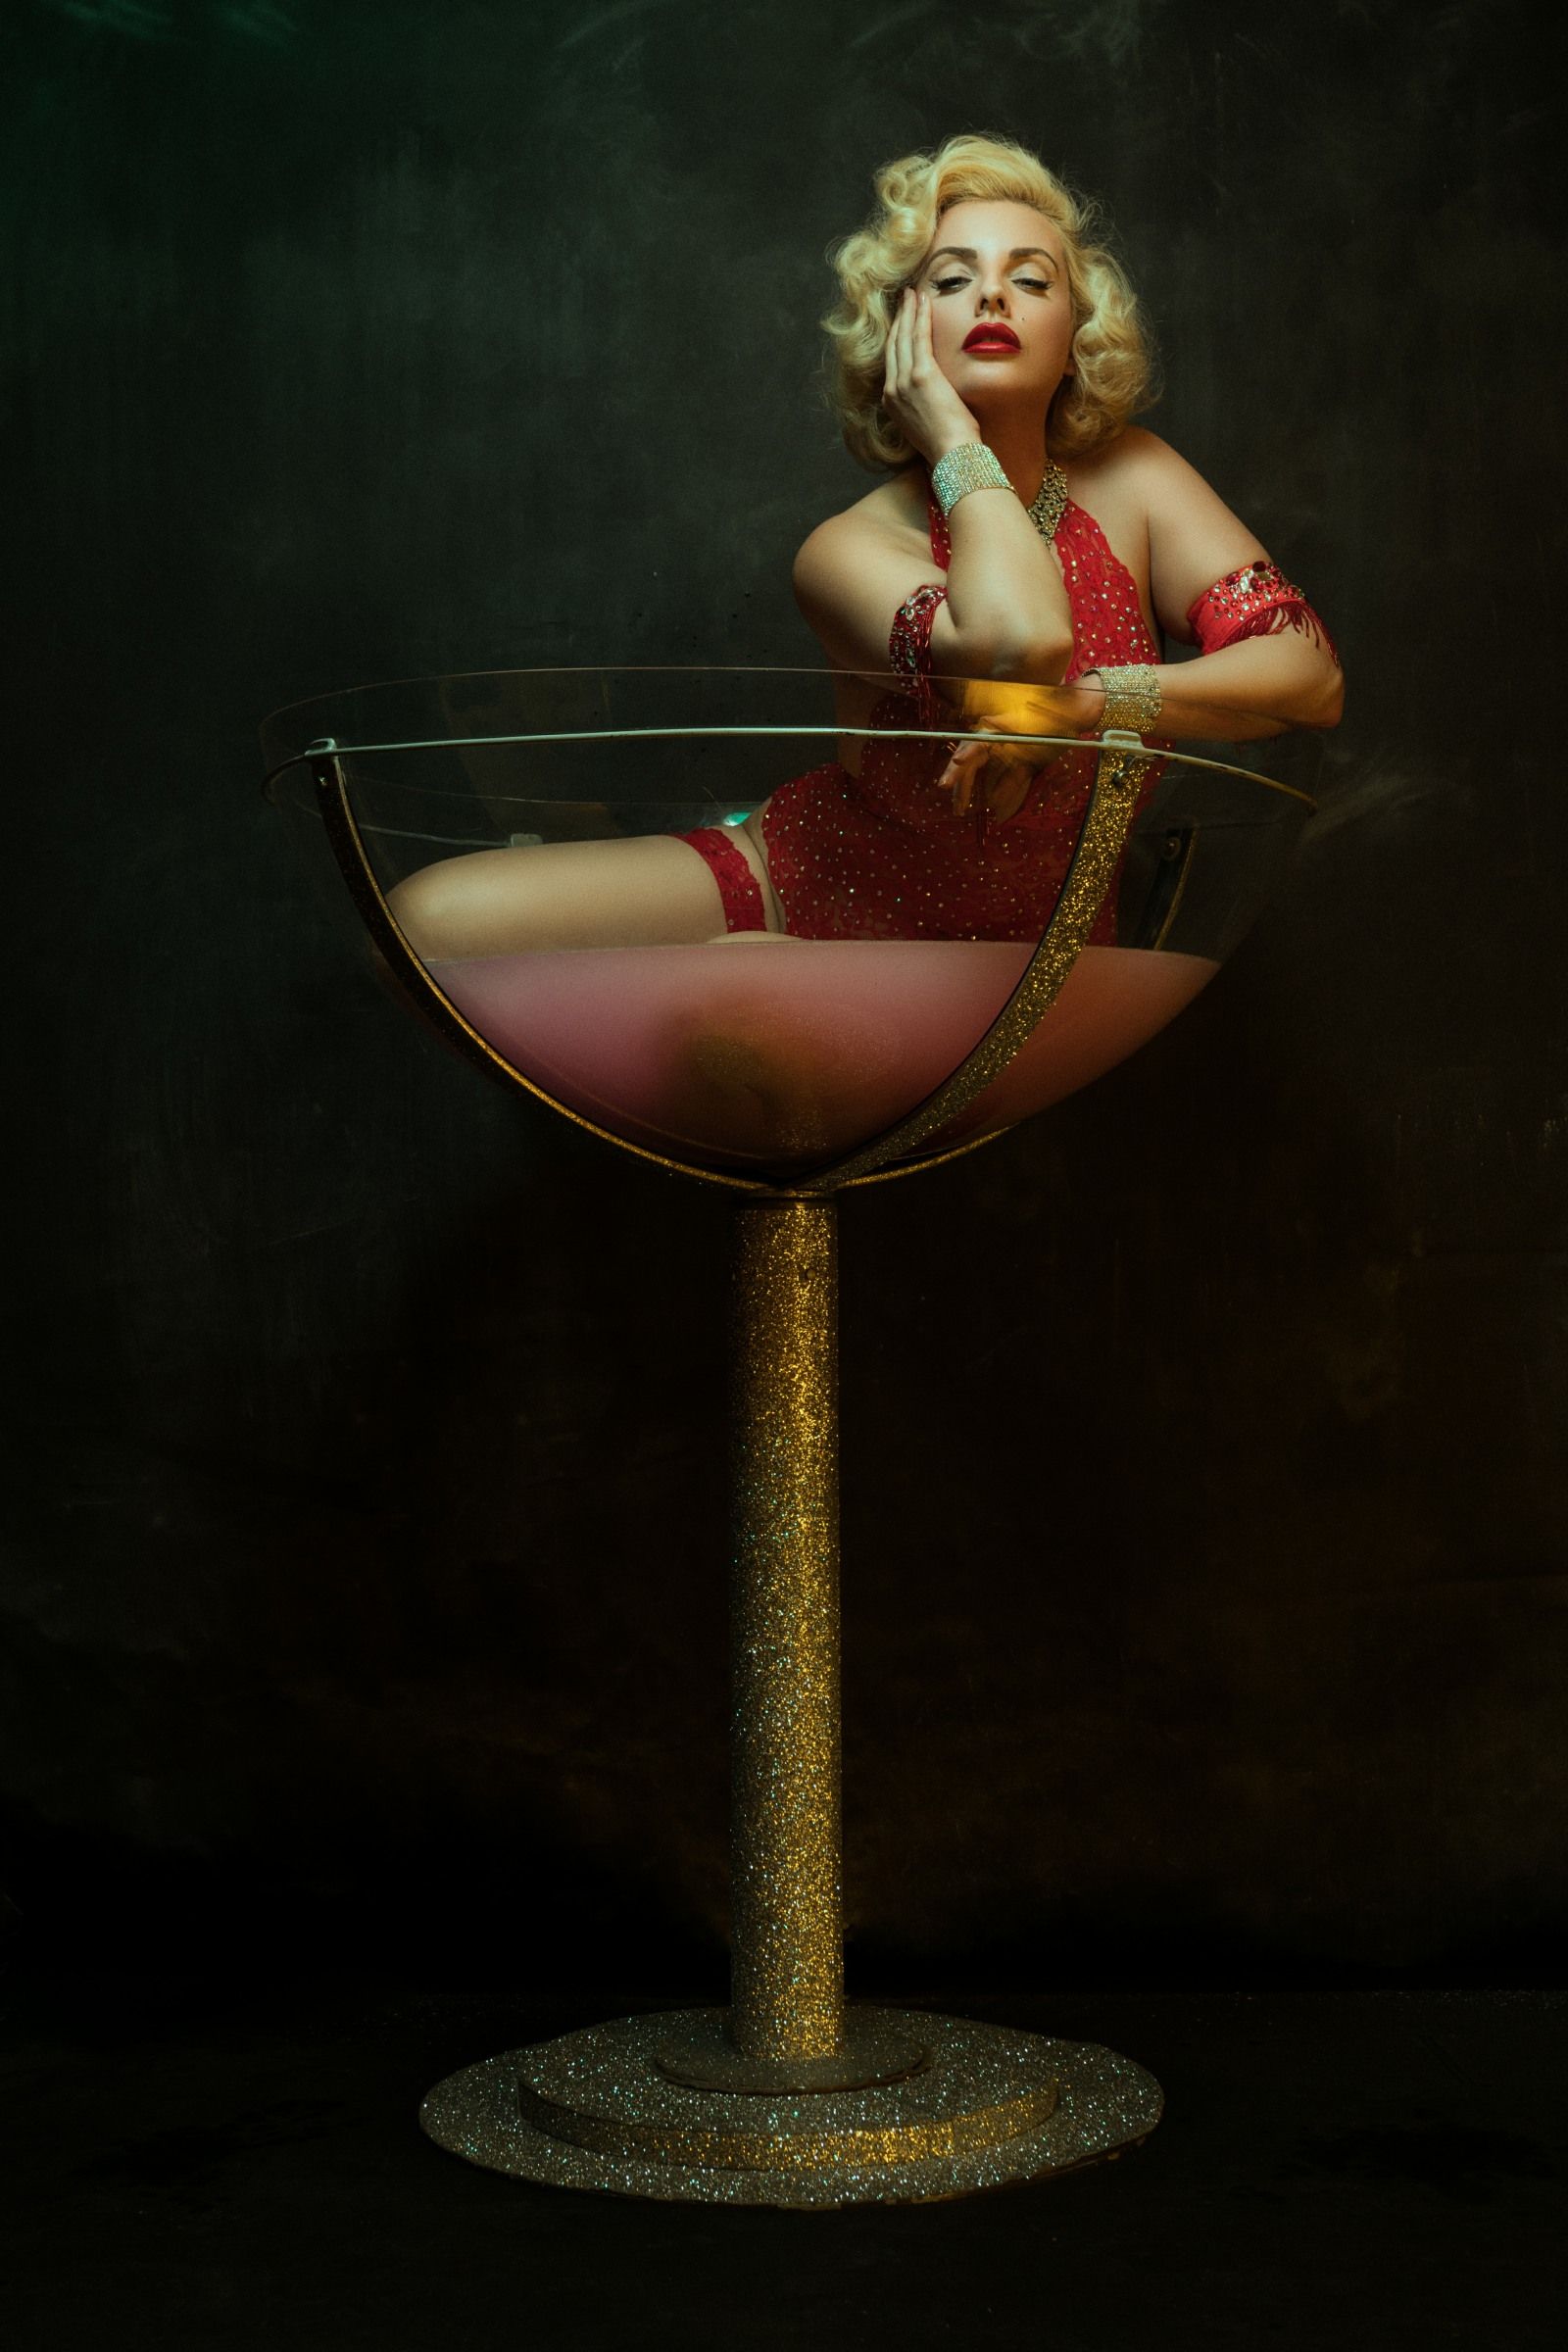 performing burlesque act in giant martini glass